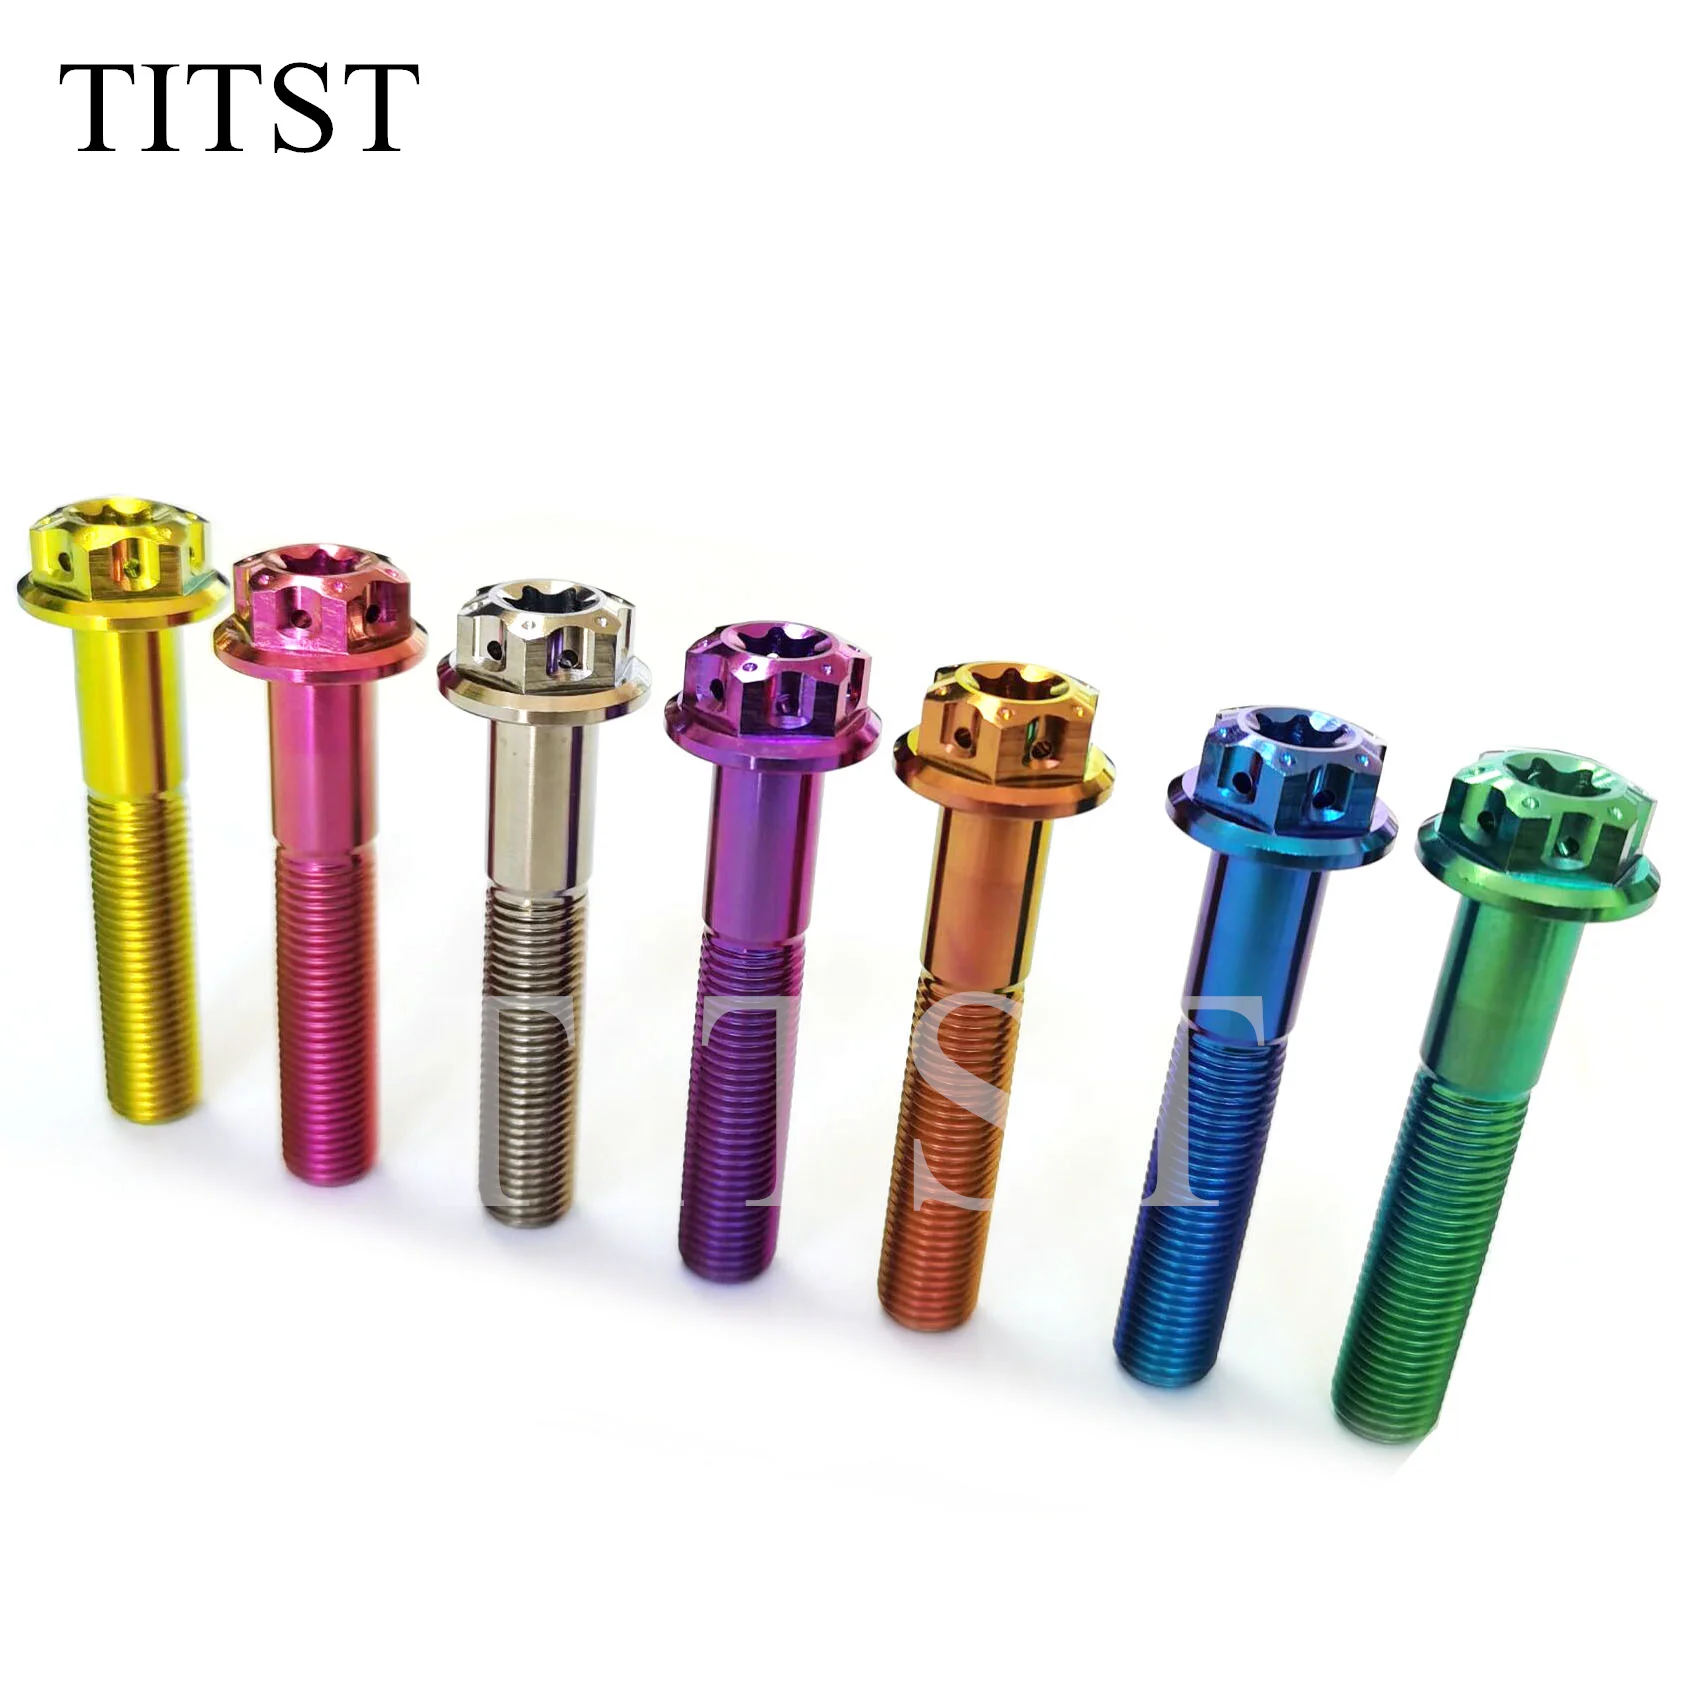 titst-m10x125x60mmtitanium-bolts-torx-flanged-race-spec-head-motorcycle-refitted-bolt-calipers-screw（-one-lot-10pcs